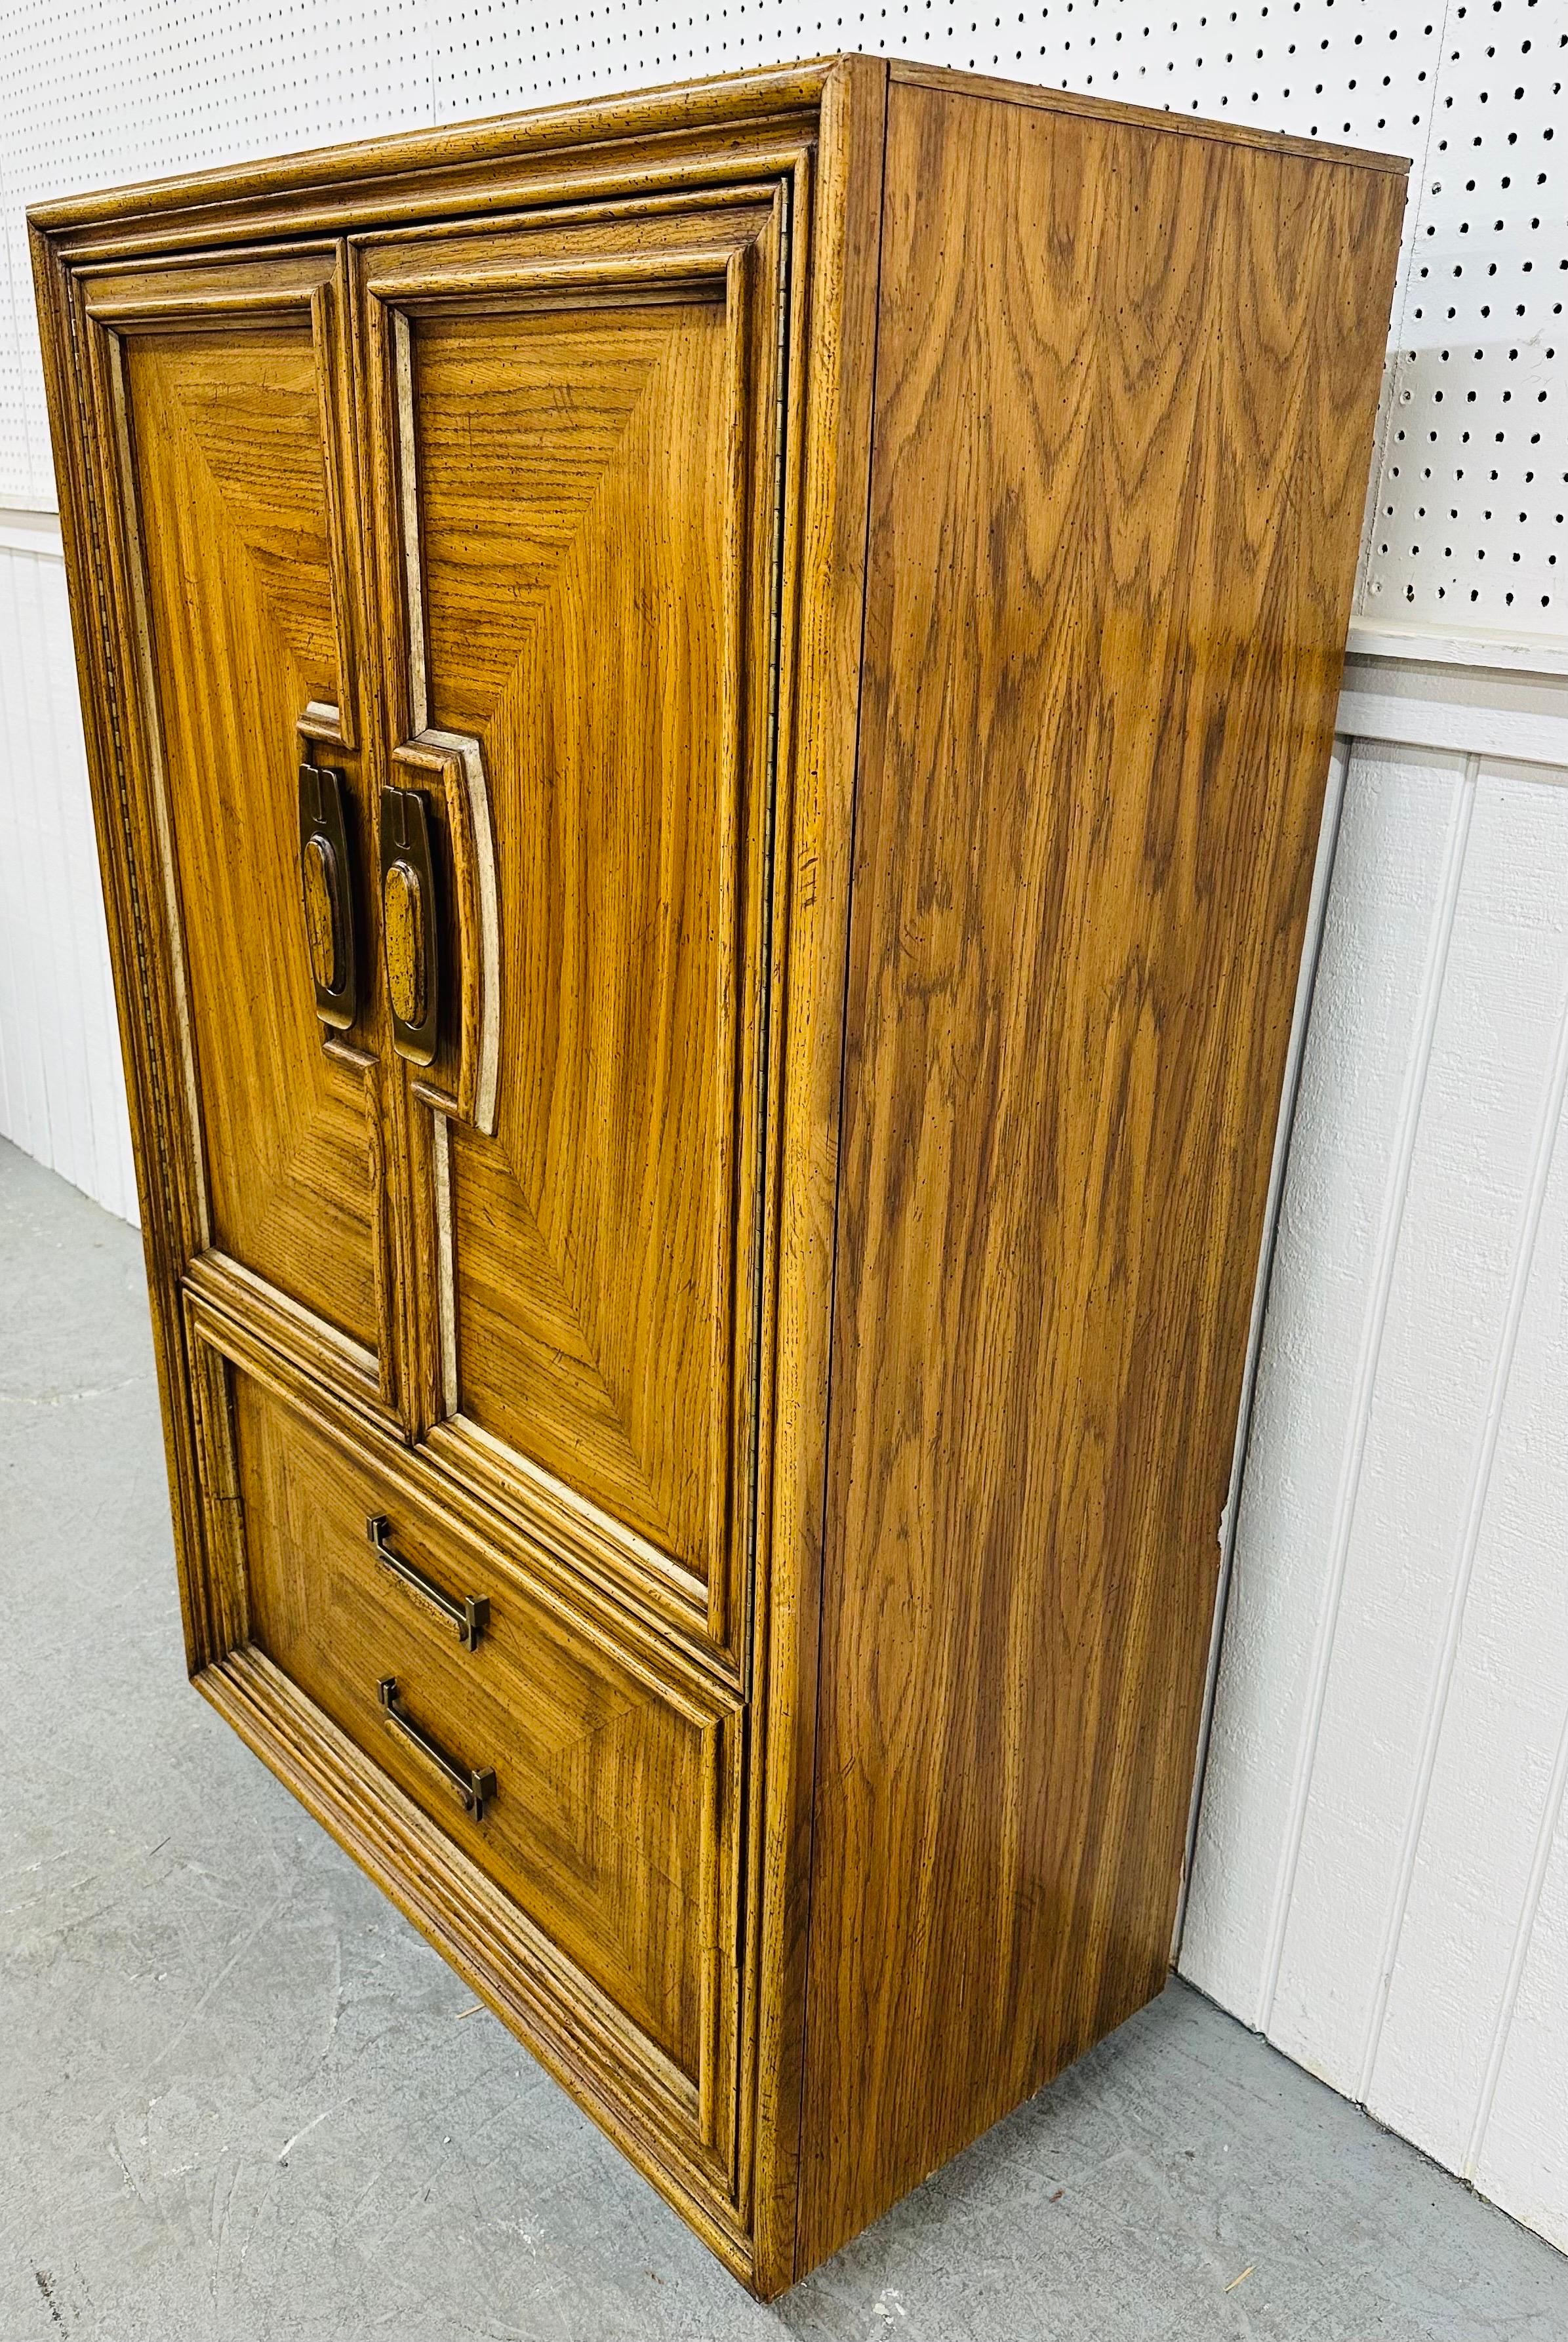 This listing is for a vintage Modern Oak Armoire. Featuring a straight line design, two large doors that open up to hidden drawers with storage space, two larger drawers at the bottom, original hardware, and a beautiful oak finish. This is an